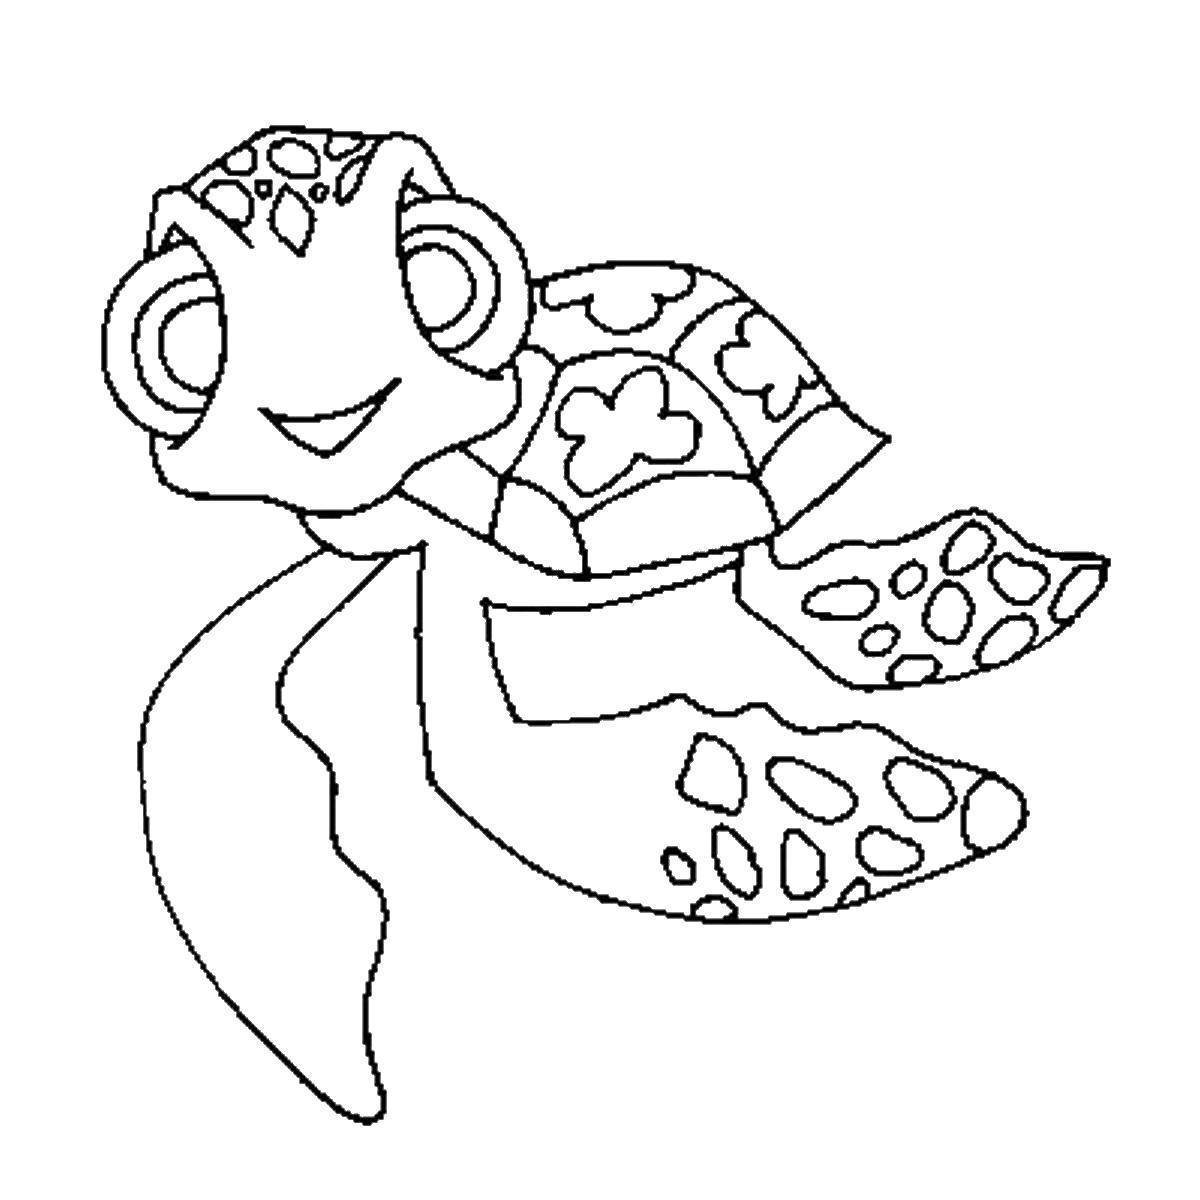 Spicy turtle coloring book